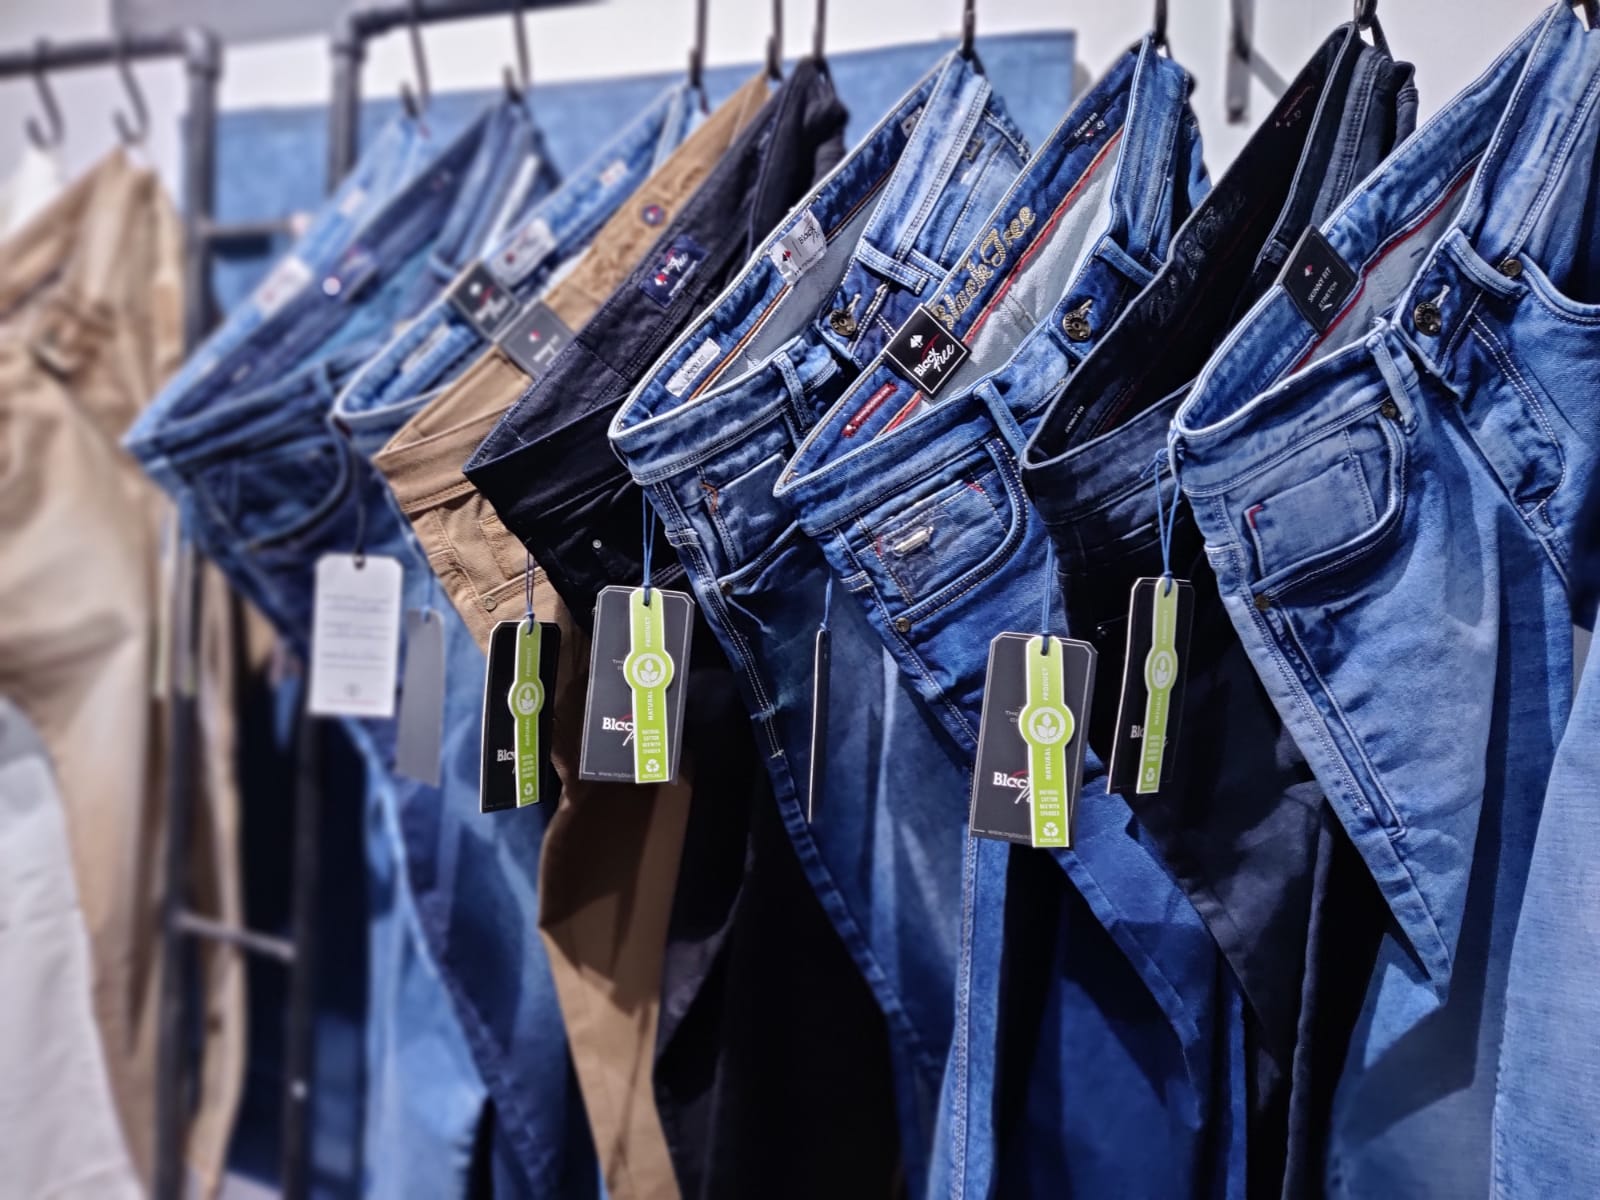 Explore High-Quality Denim Jeans by BlackTree